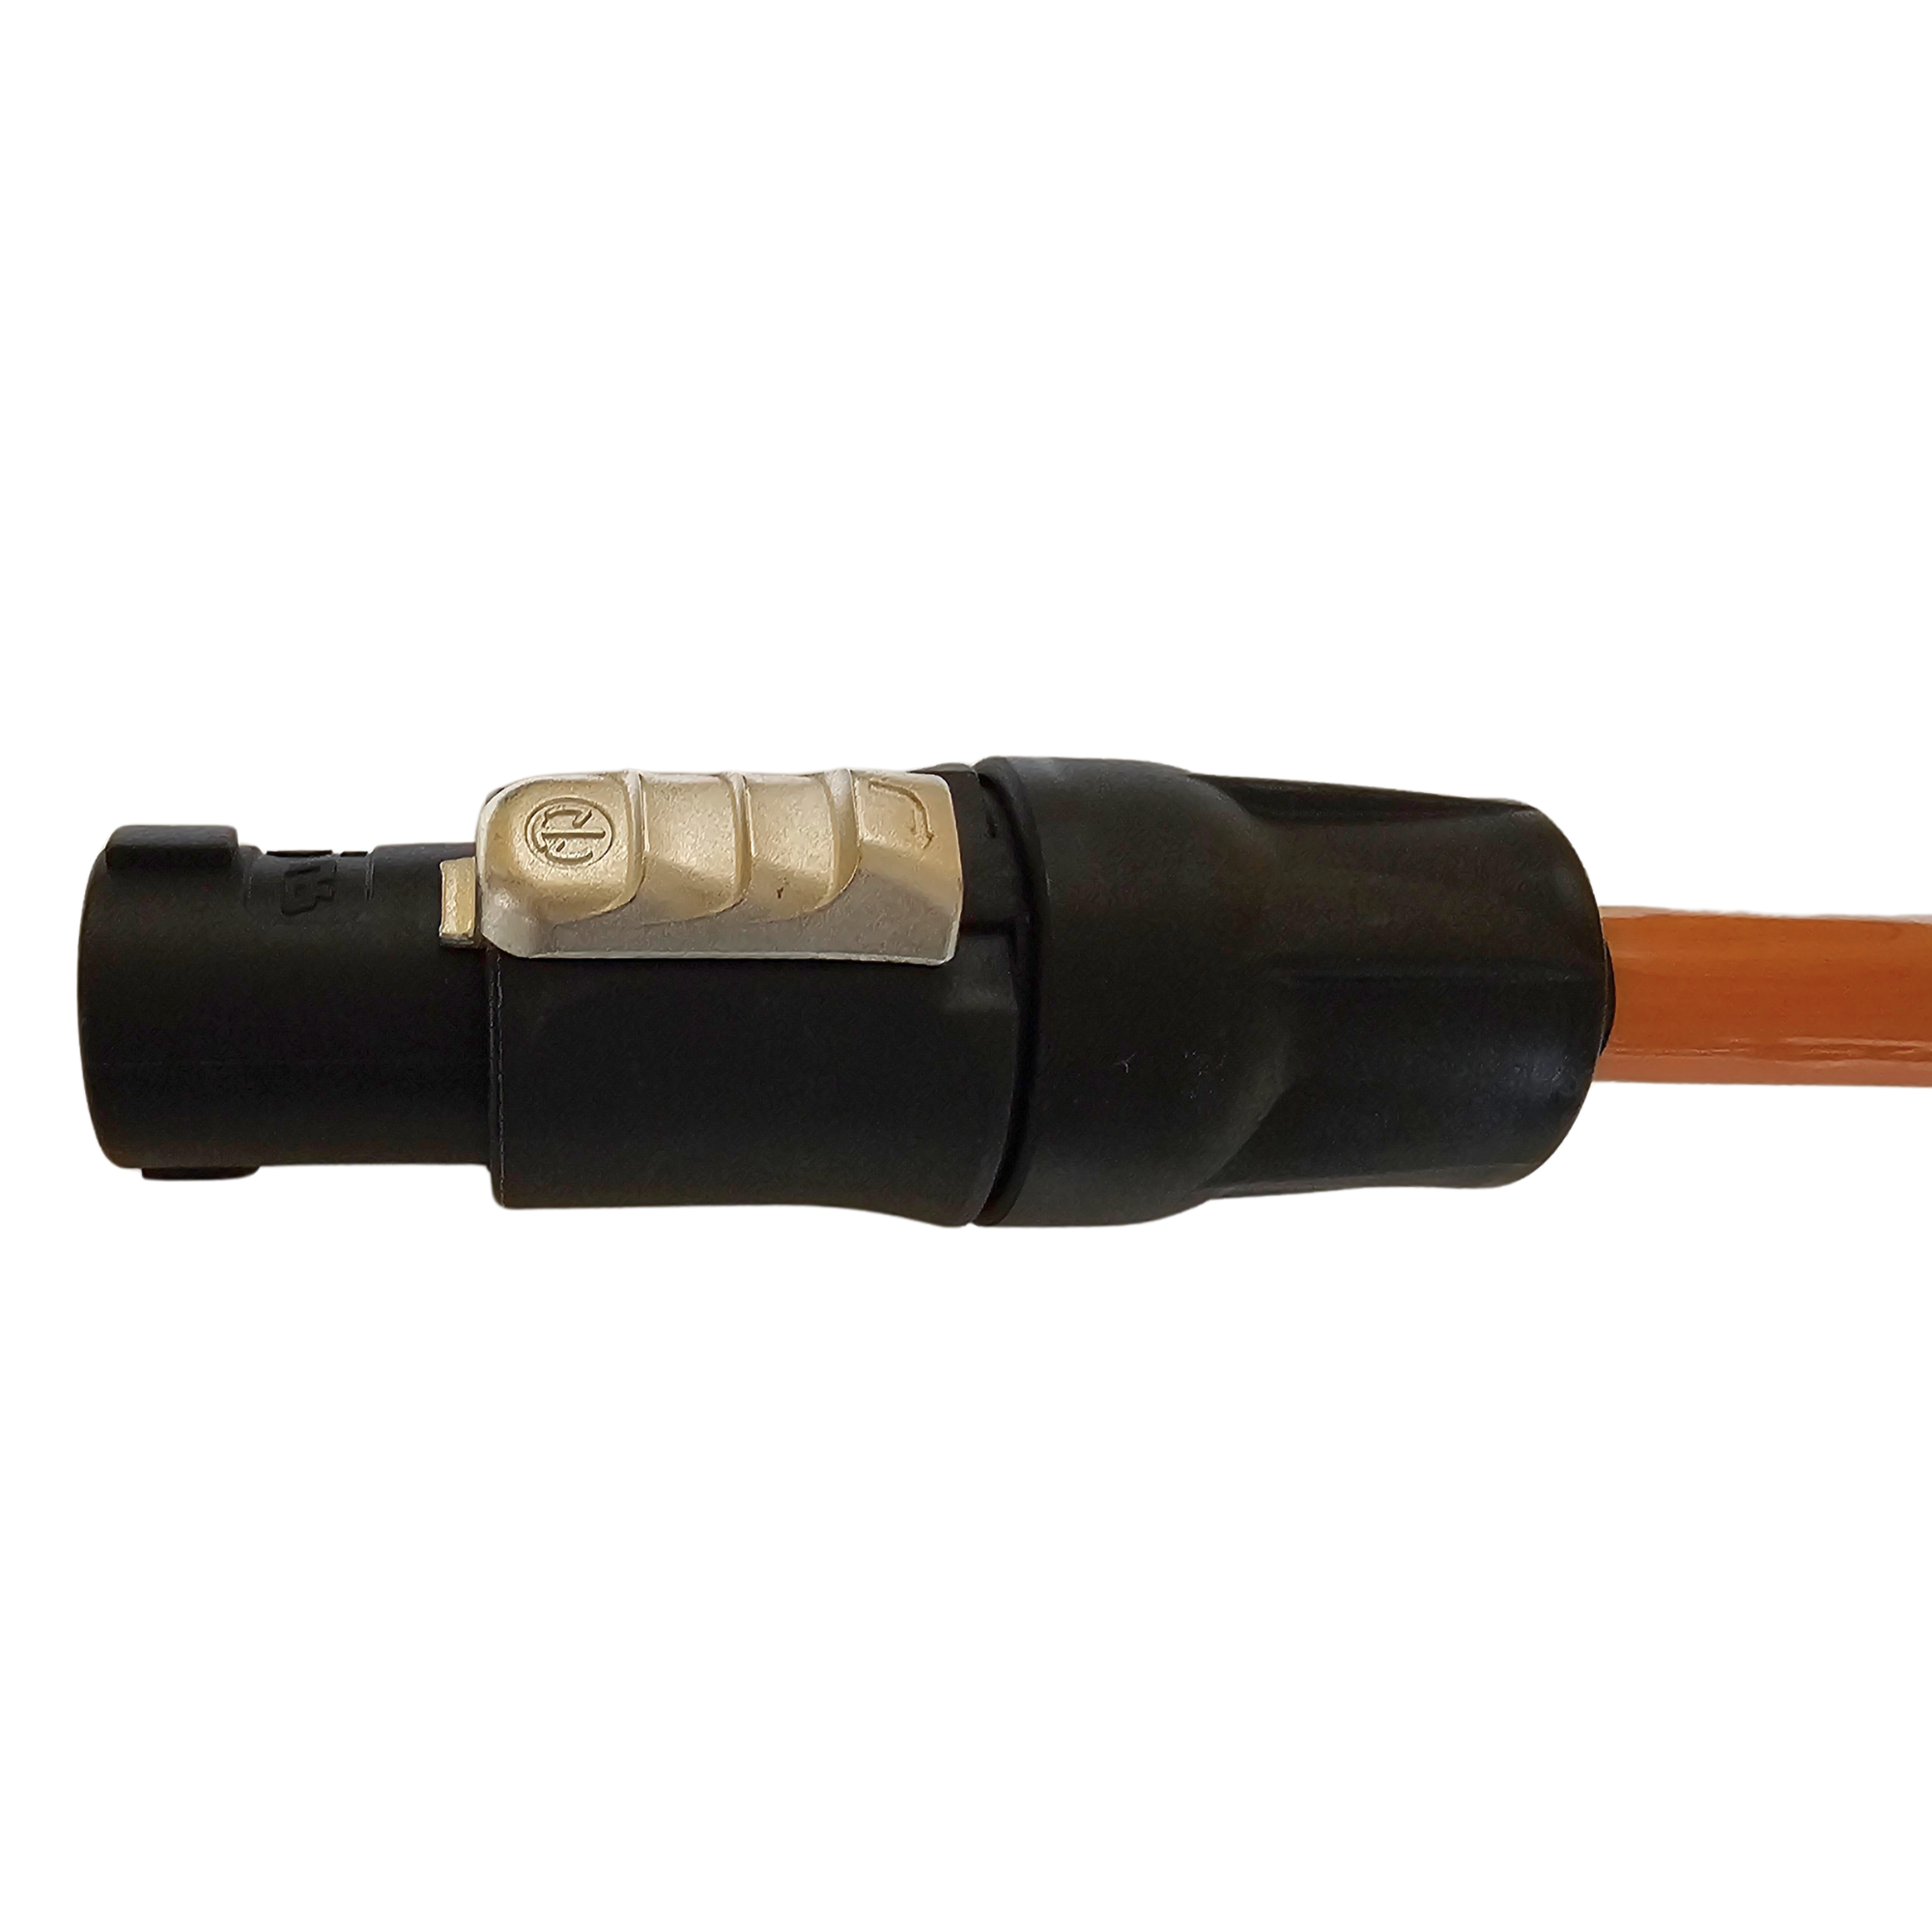 Stihl Connecting Cable | 4850 440 2012